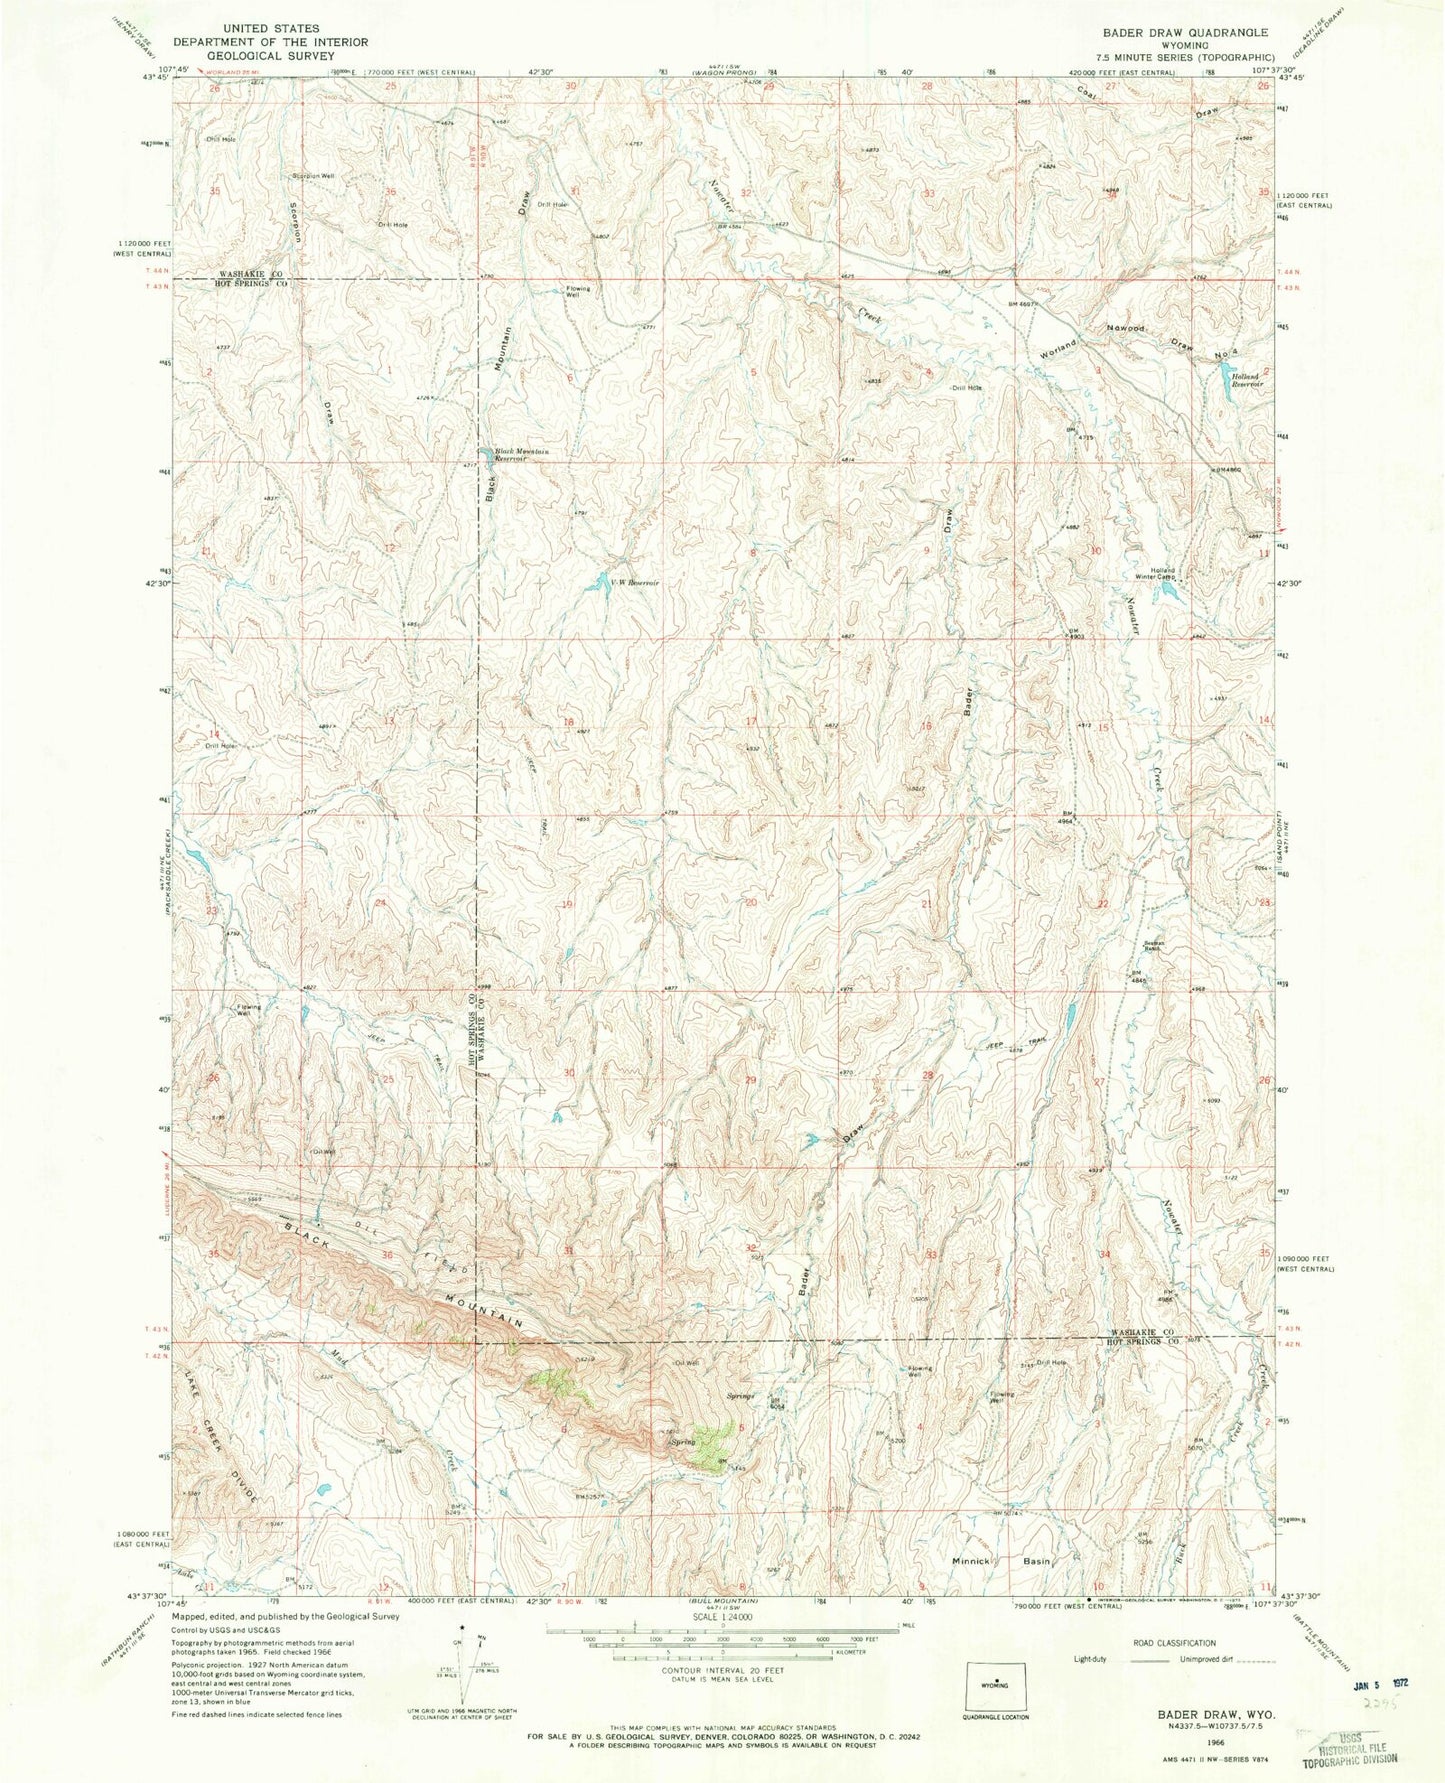 Classic USGS Bader Draw Wyoming 7.5'x7.5' Topo Map Image